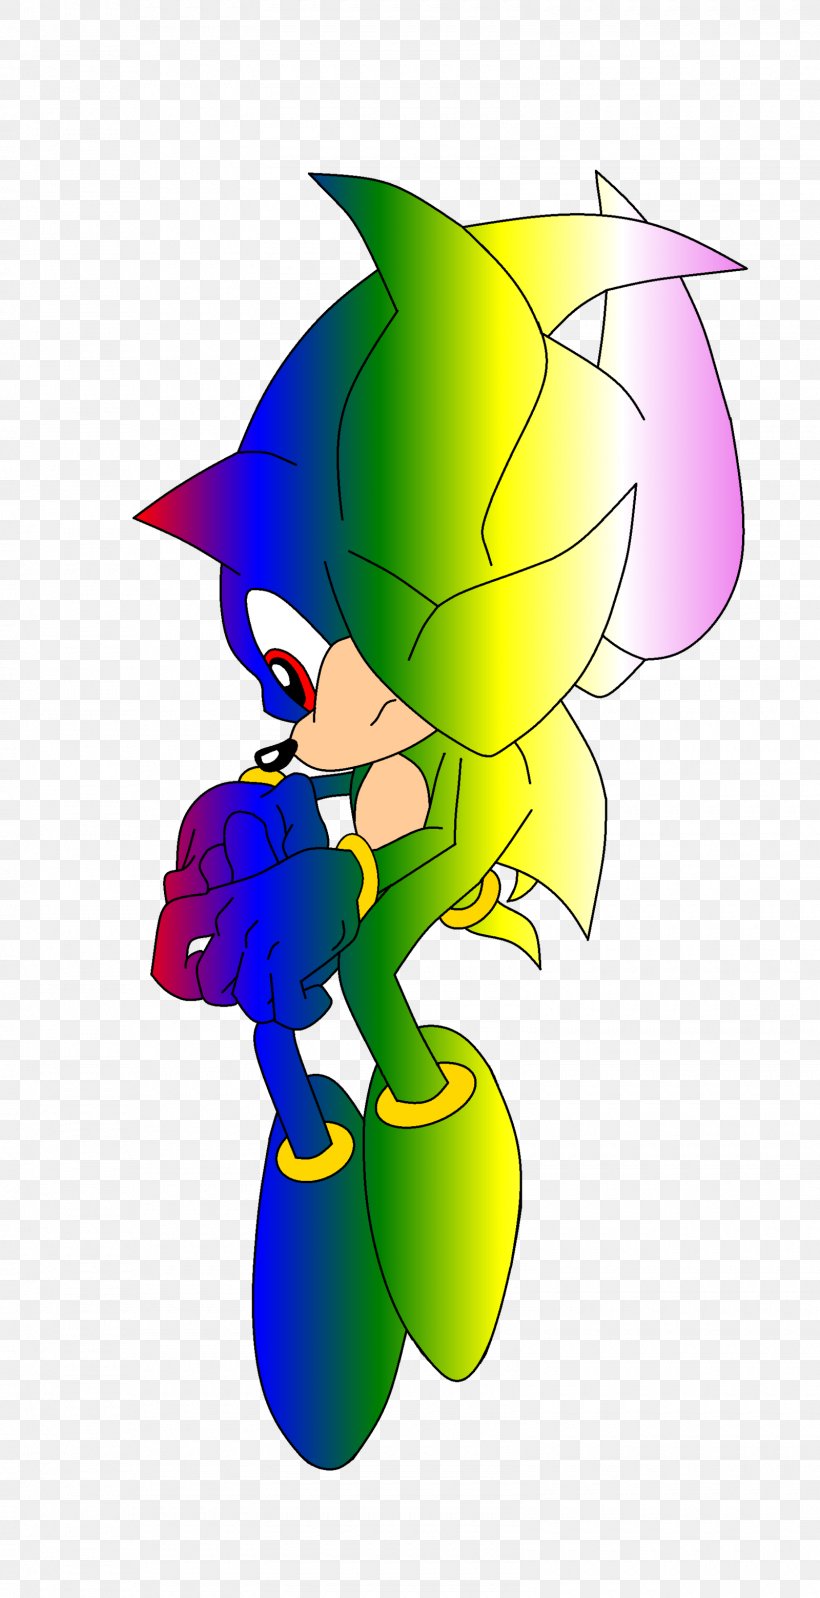 Sonic And The Secret Rings Sonic The Hedgehog Fan Art Clip Art Illustration, PNG, 1600x3119px, Sonic And The Secret Rings, Art, Artist, Artwork, Cartoon Download Free